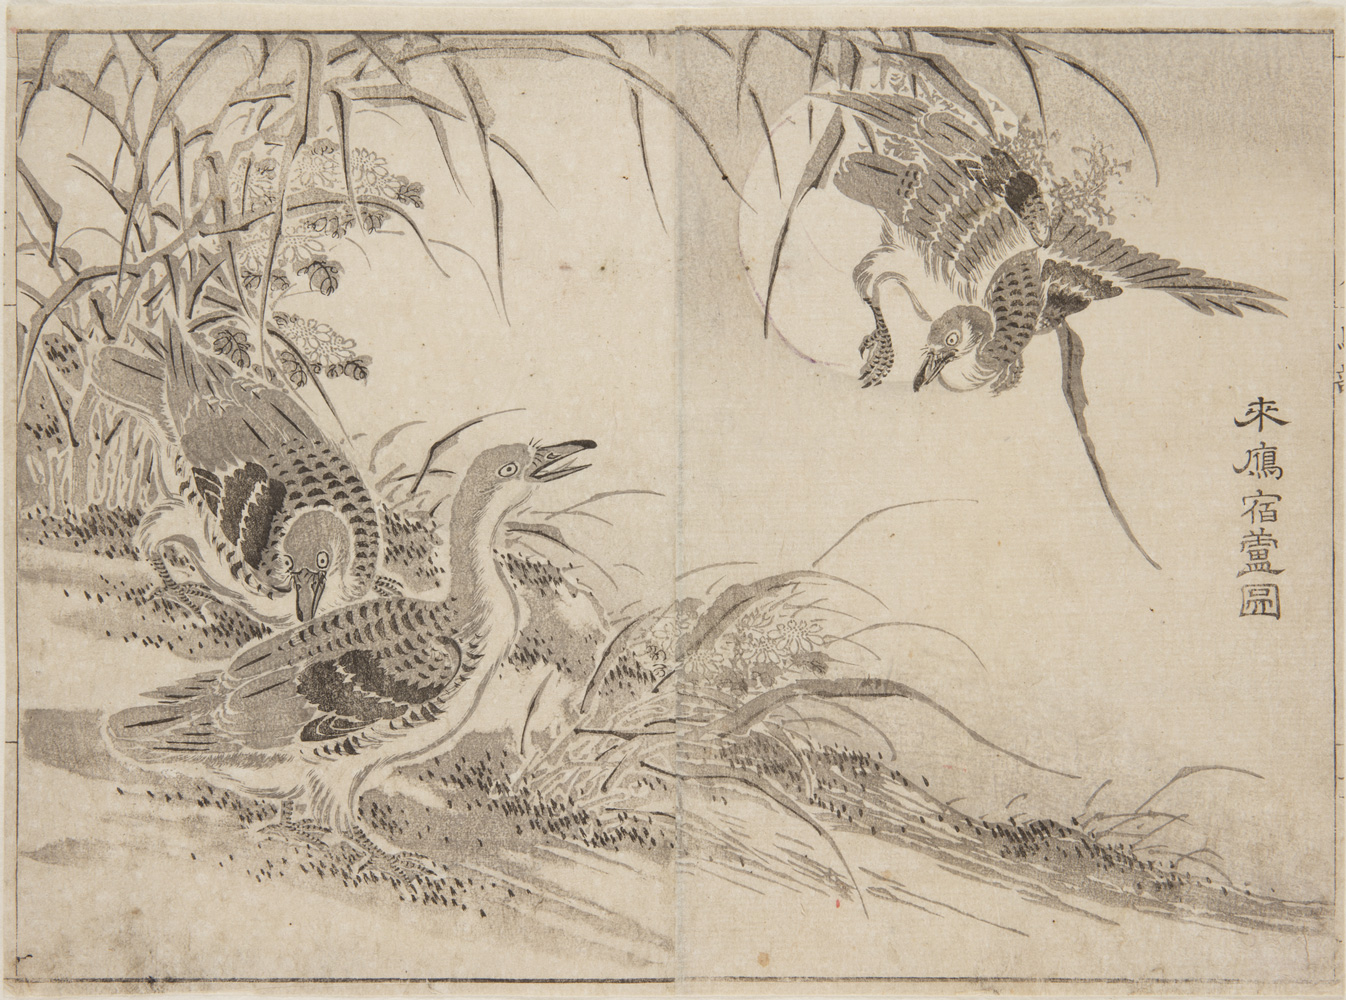 Japanese print of three geese, two on the ground and a third coming into land next to them.